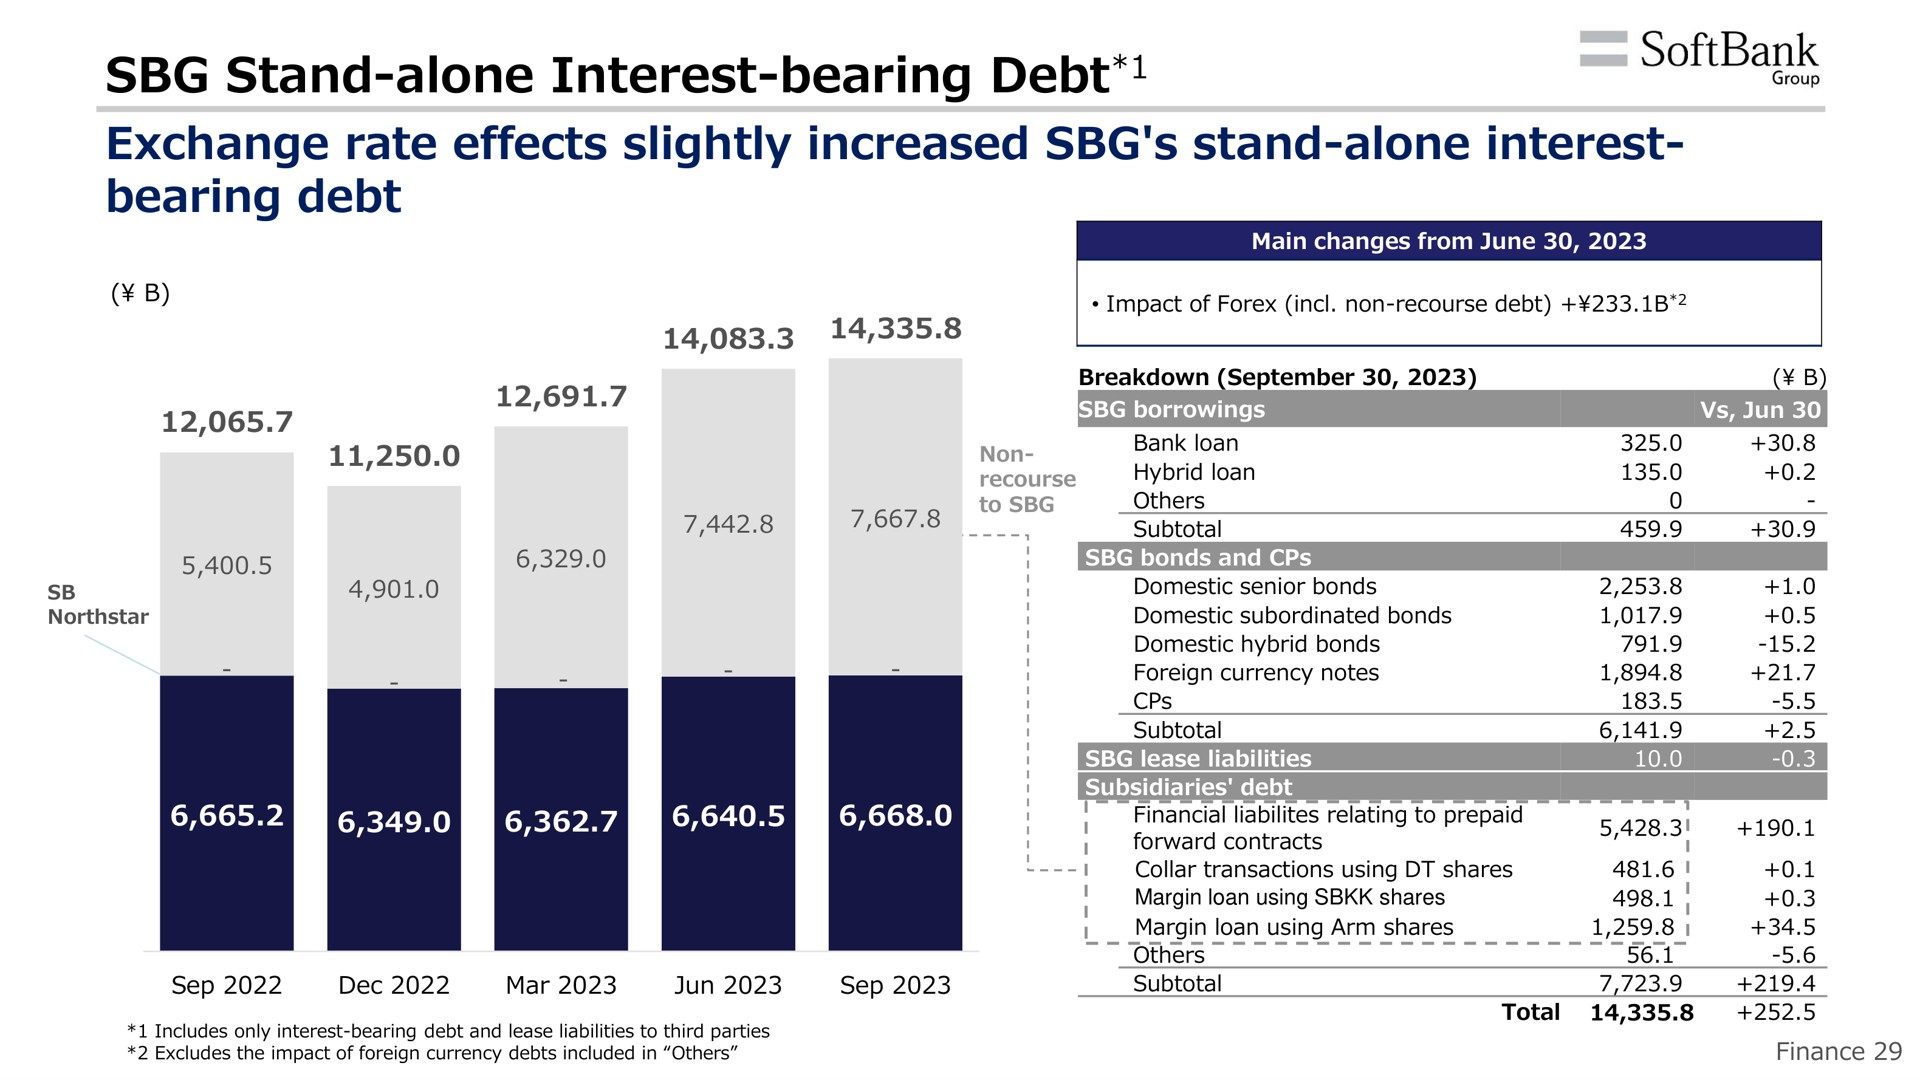 stand alone interest bearing debt exchange rate effects slightly increased stand alone interest bearing debt | SoftBank